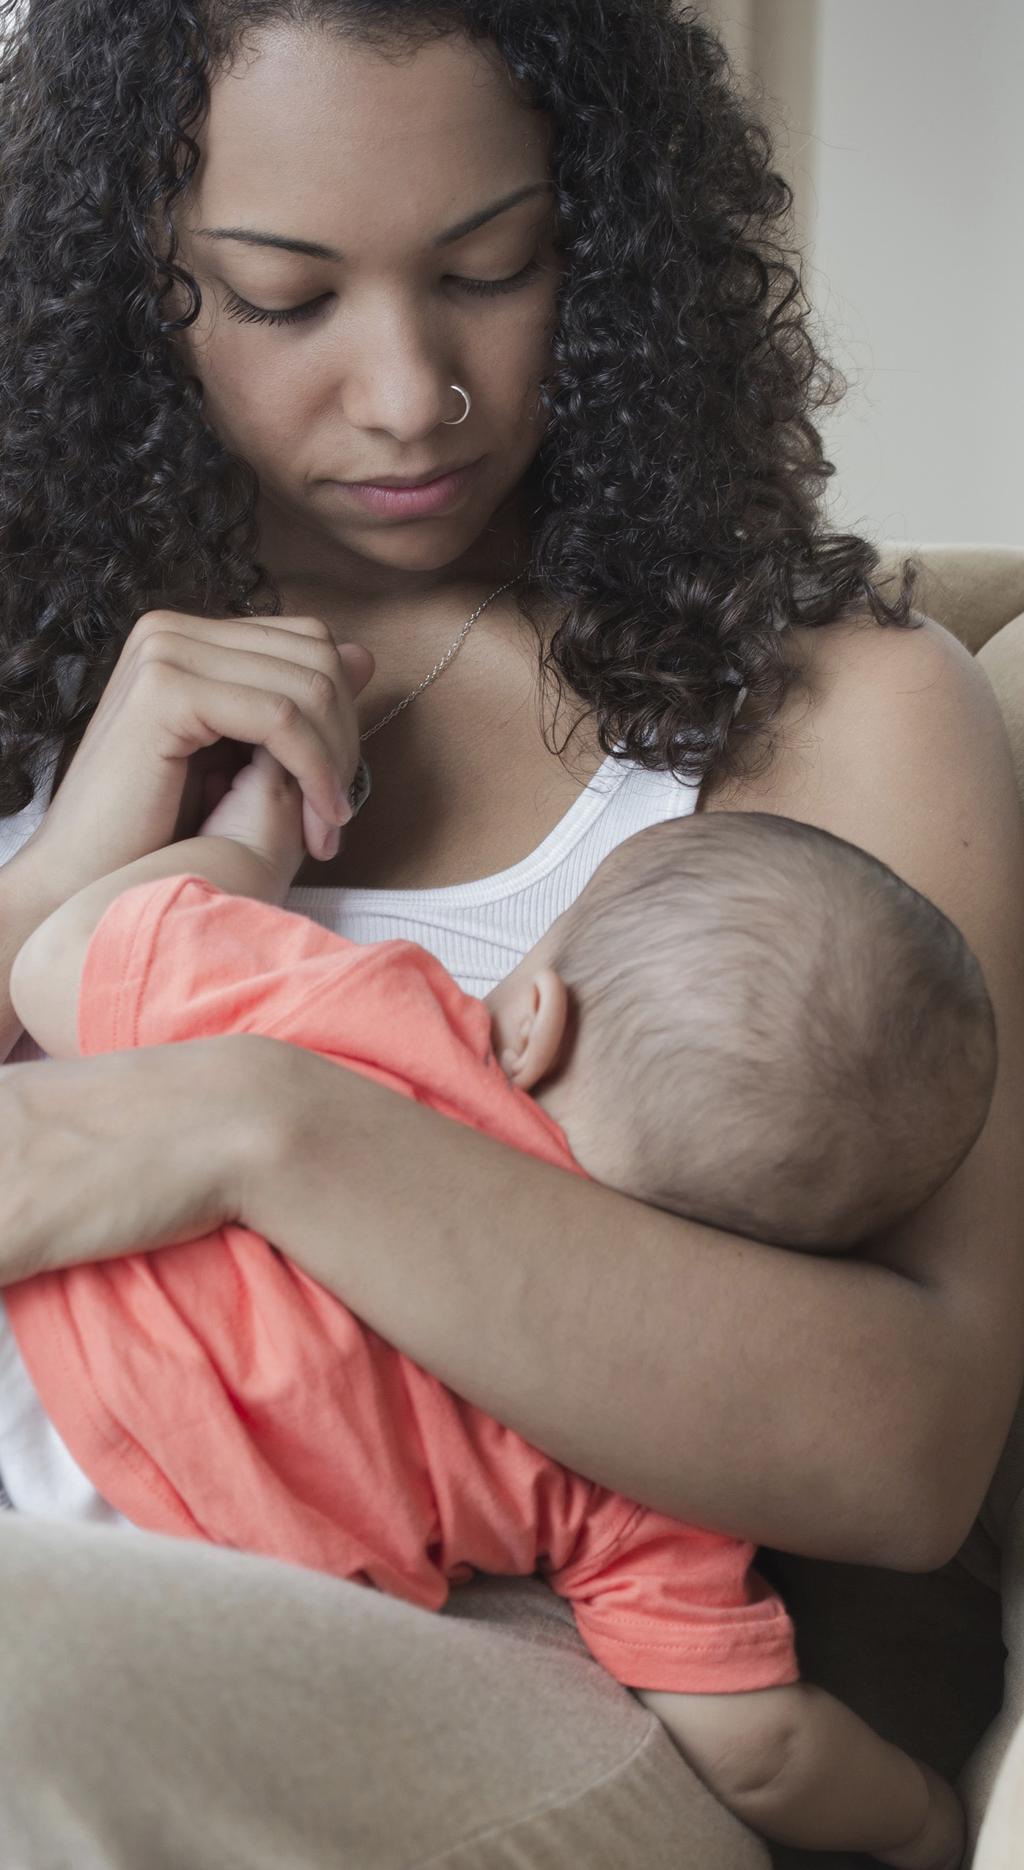 Help for moms with depression is available in more ways than most people think.